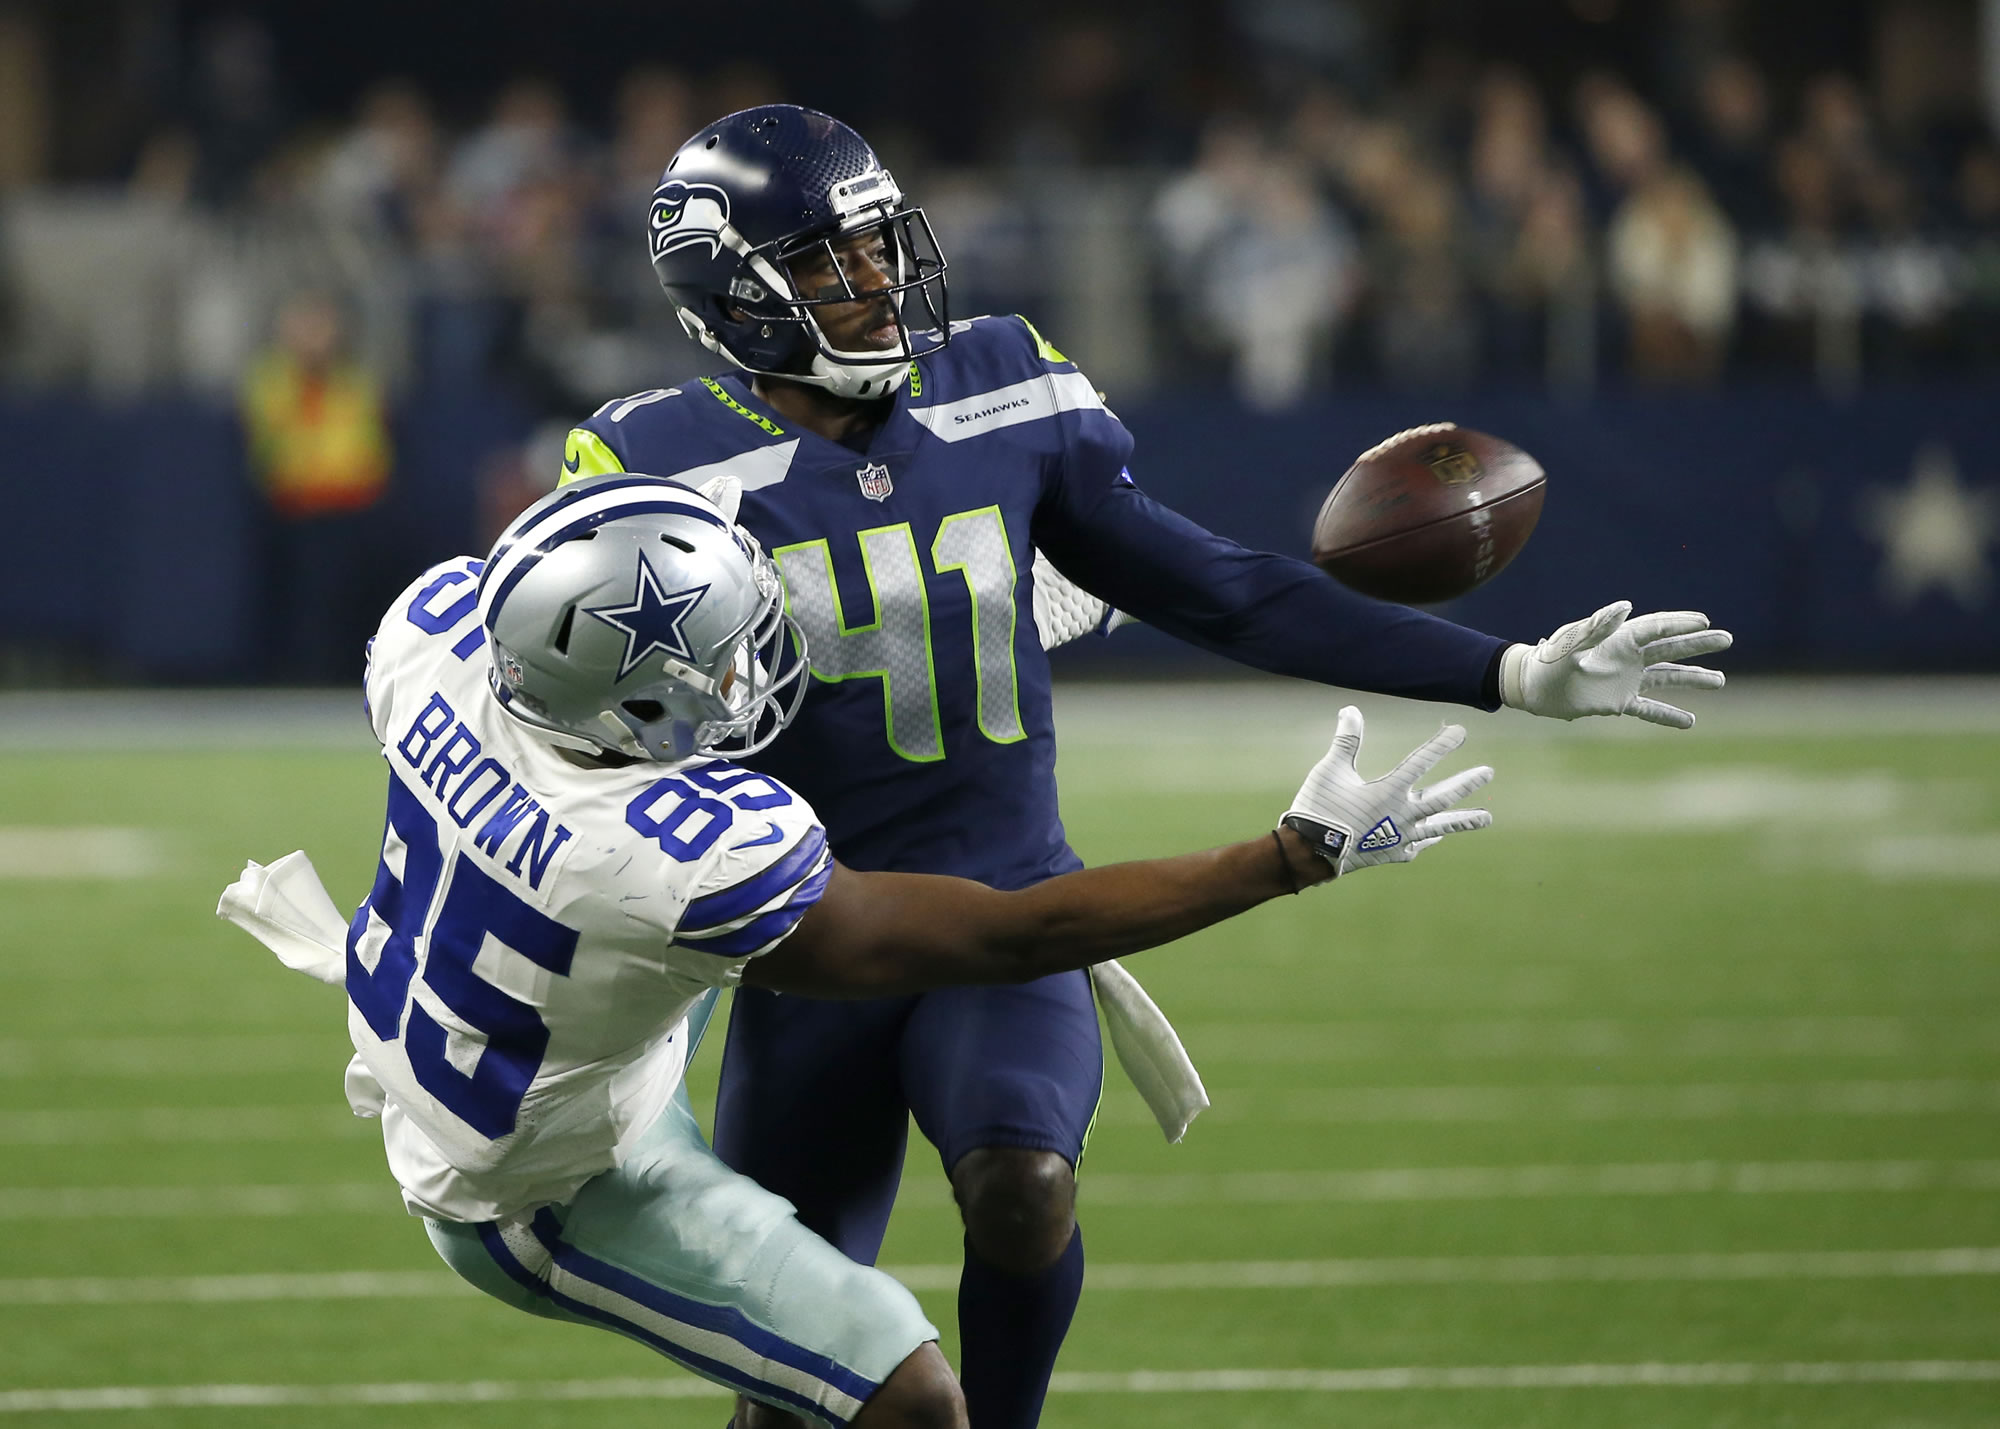 Seattle Seahawks cornerback Byron Maxwell (41) breaks up a pass intended for Dallas Cowboys' Noah Brown (85) in the second half of an NFL football game, Sunday, Dec. 24, 2017, in Arlington, Texas. Maxwell was charged with pass interference on the play.